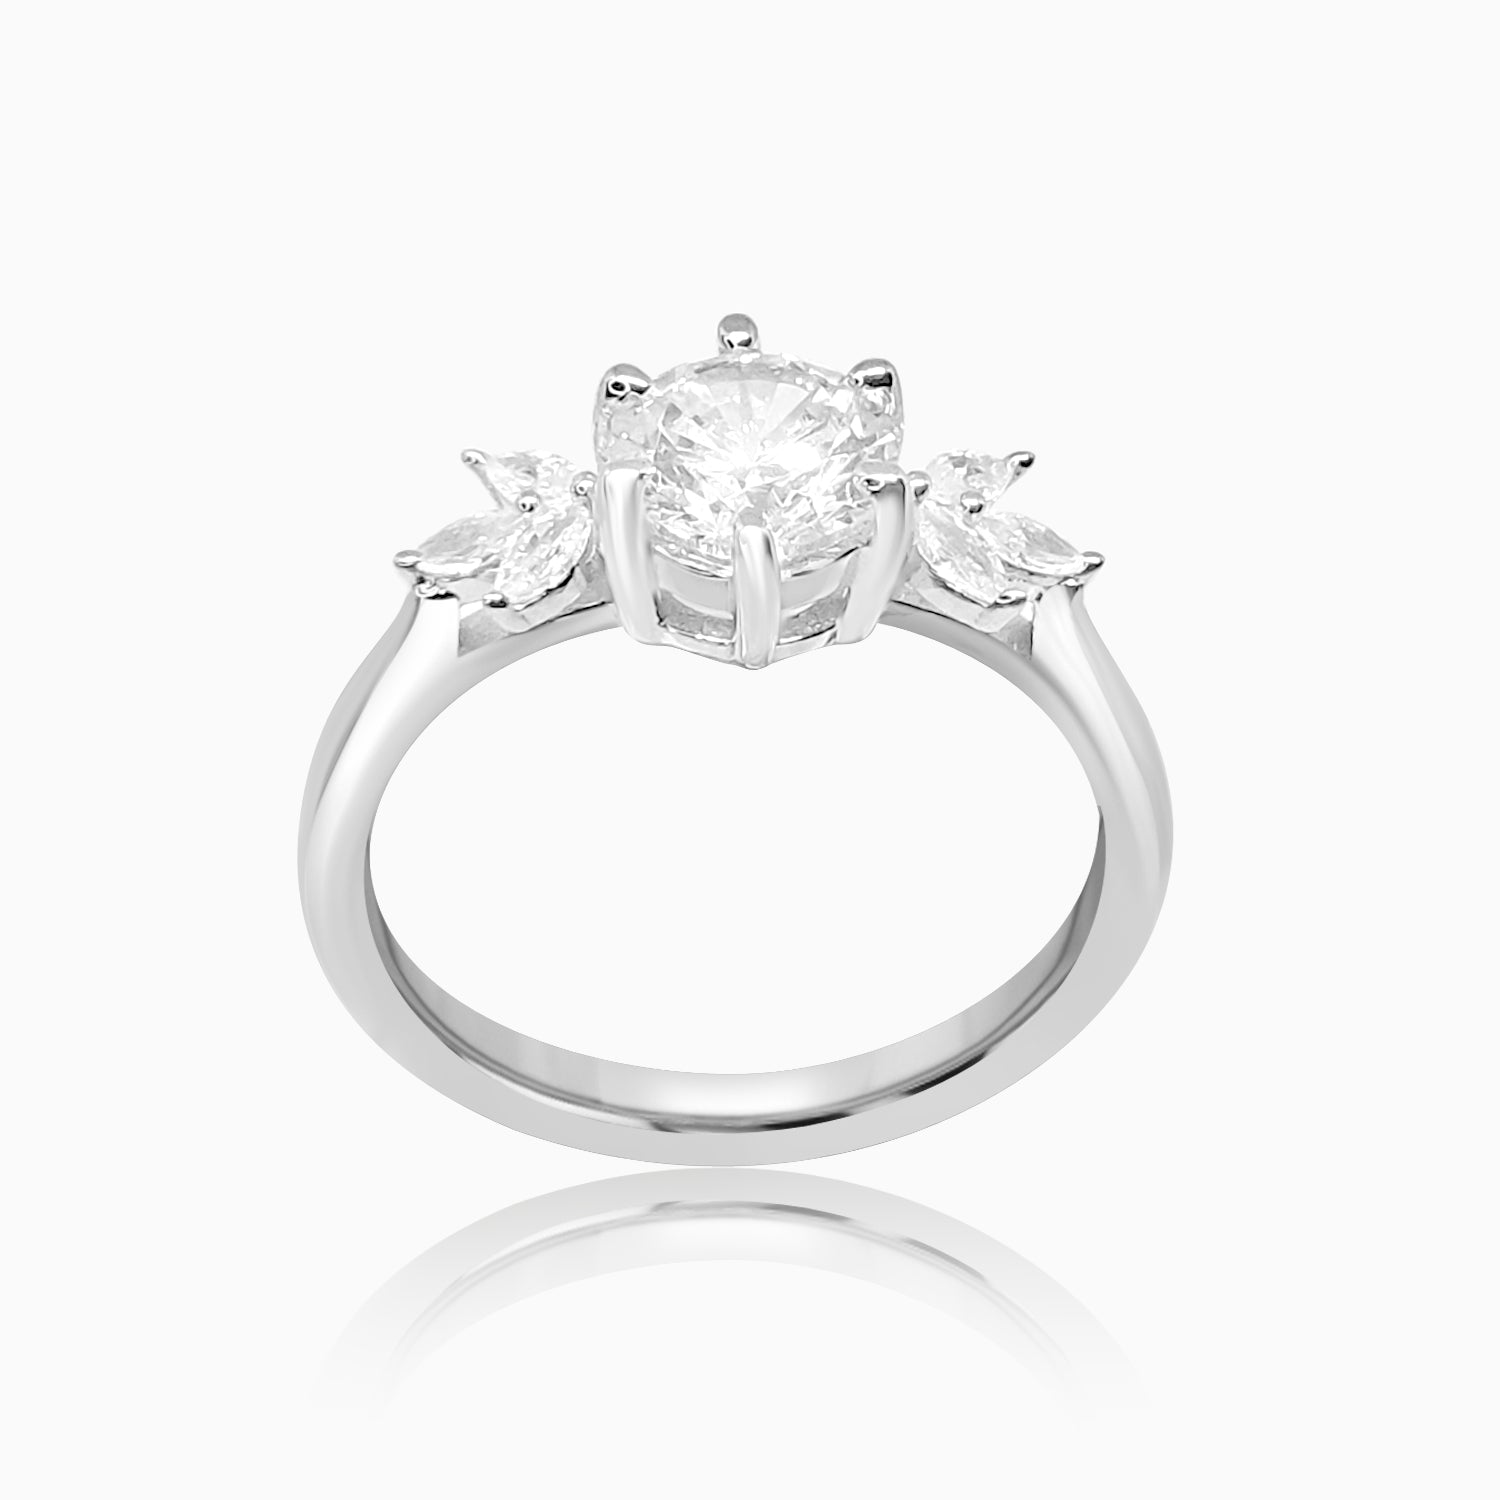 Silver Sparkling Nature Solitaire Ring